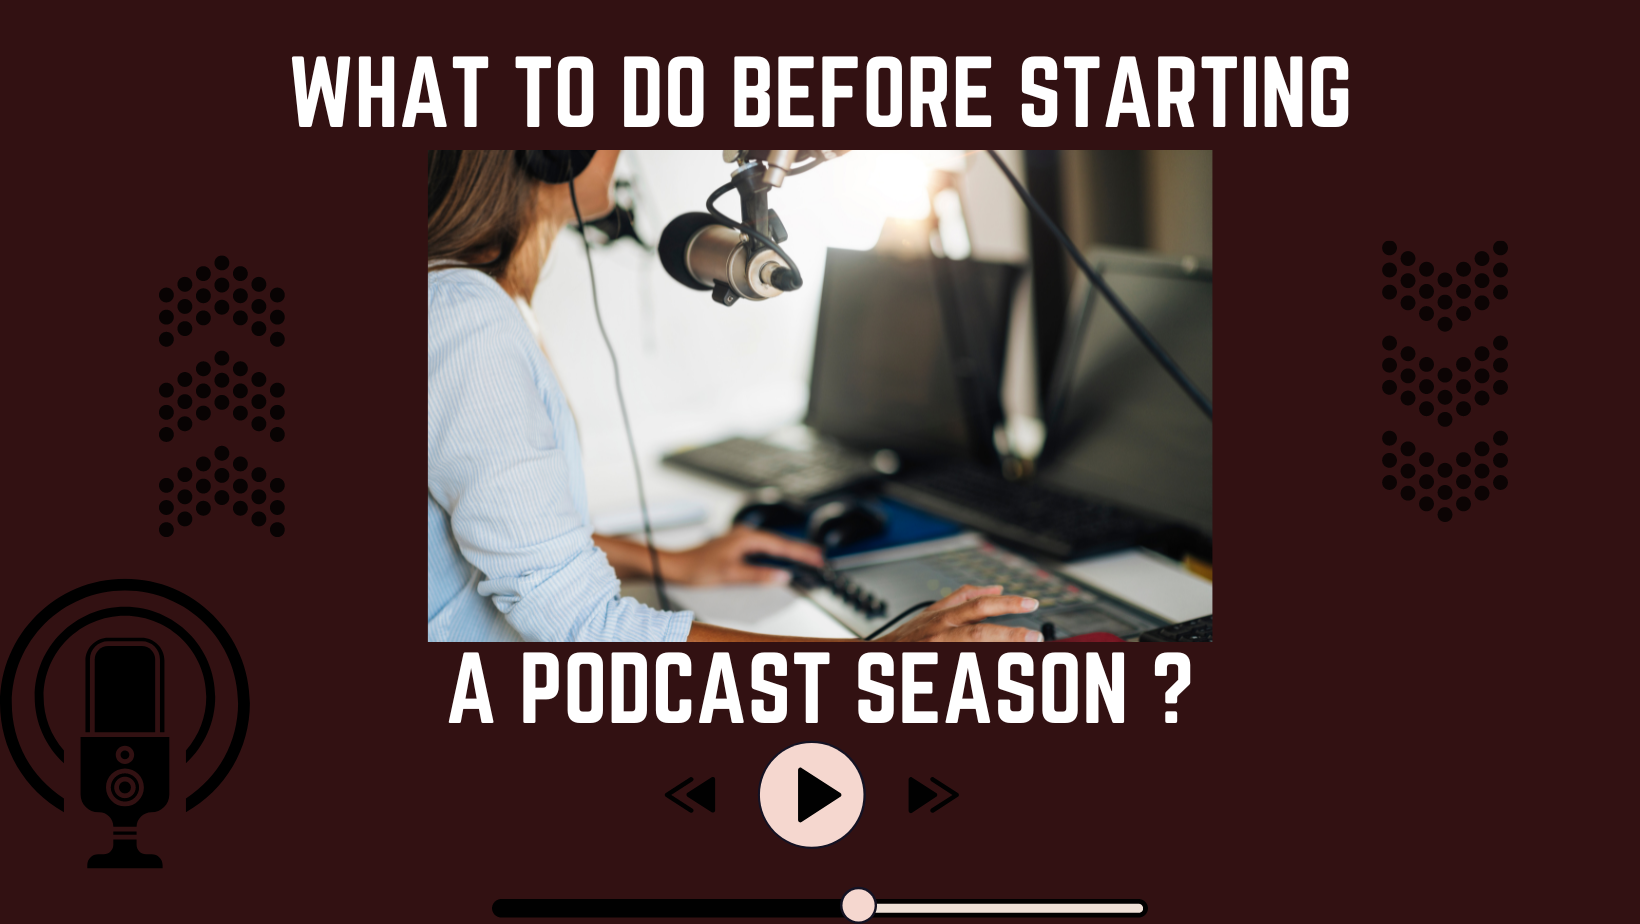 What To Do Before Starting A Podcast Season?